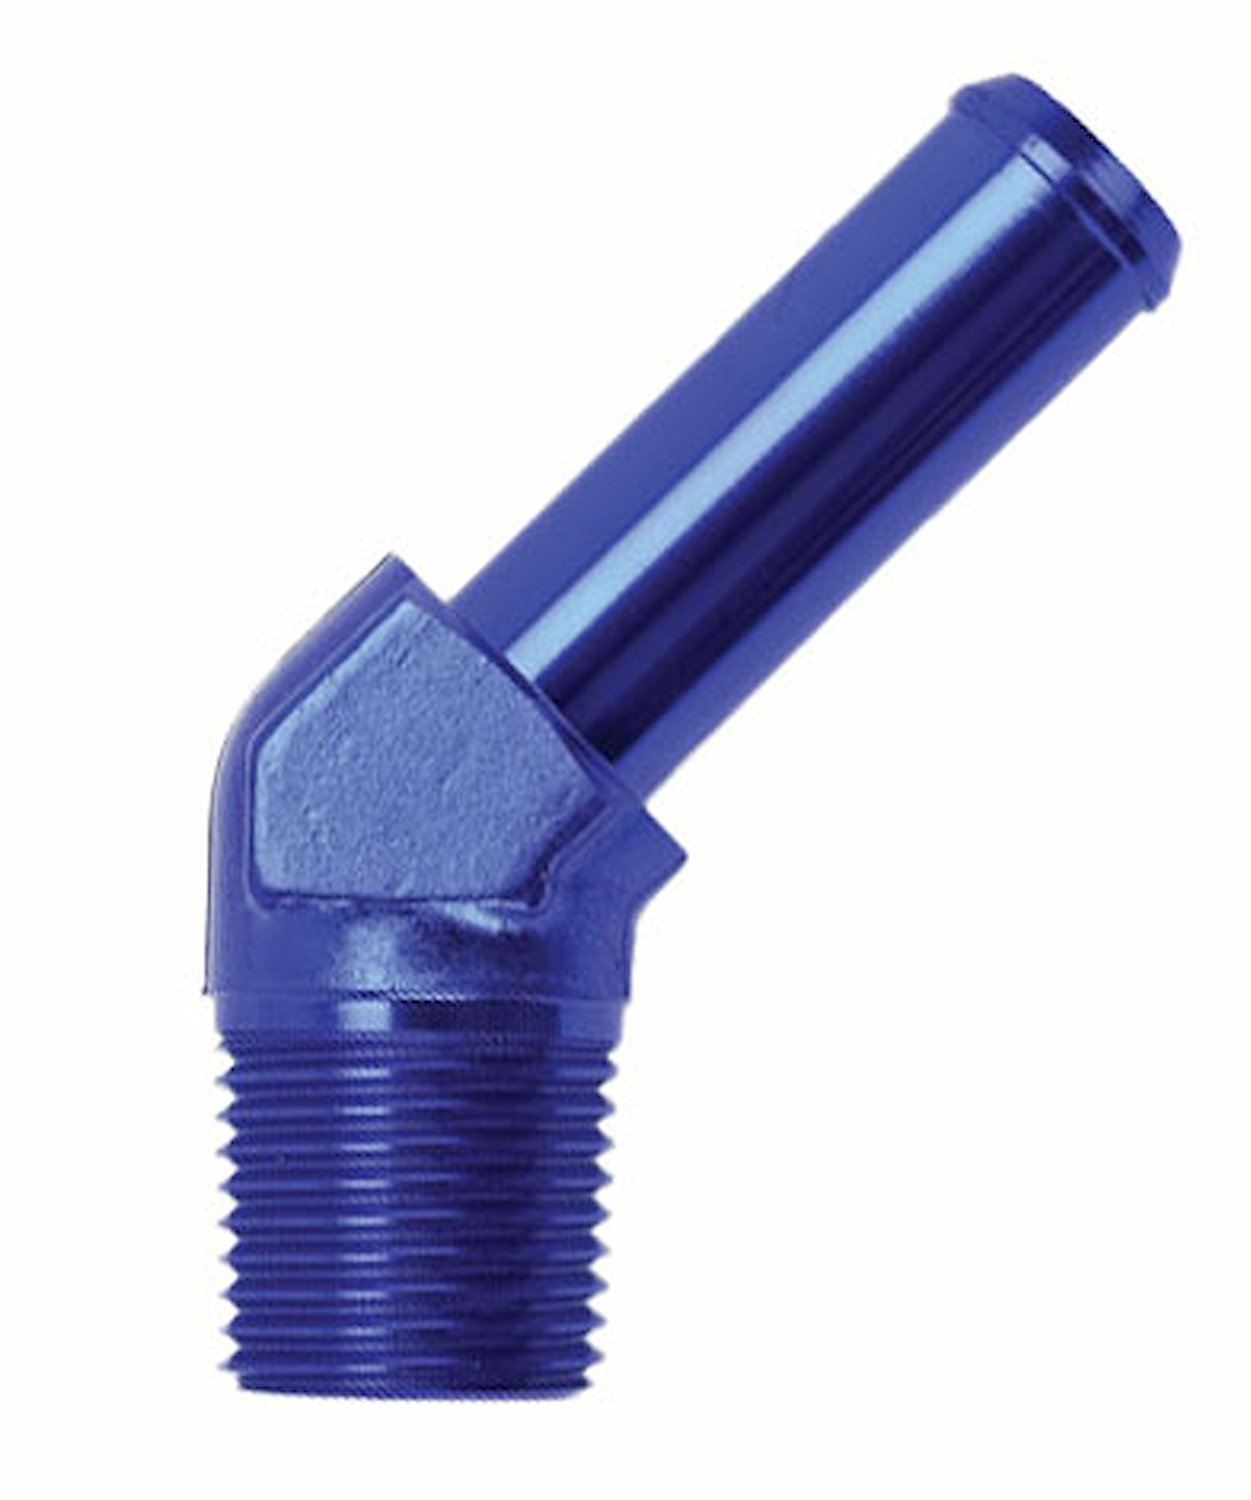 NPT to Hose Barb Fitting, 45-Degree [1/8 in. NPT Male to 1/4 in. I.D. Hose, Blue]